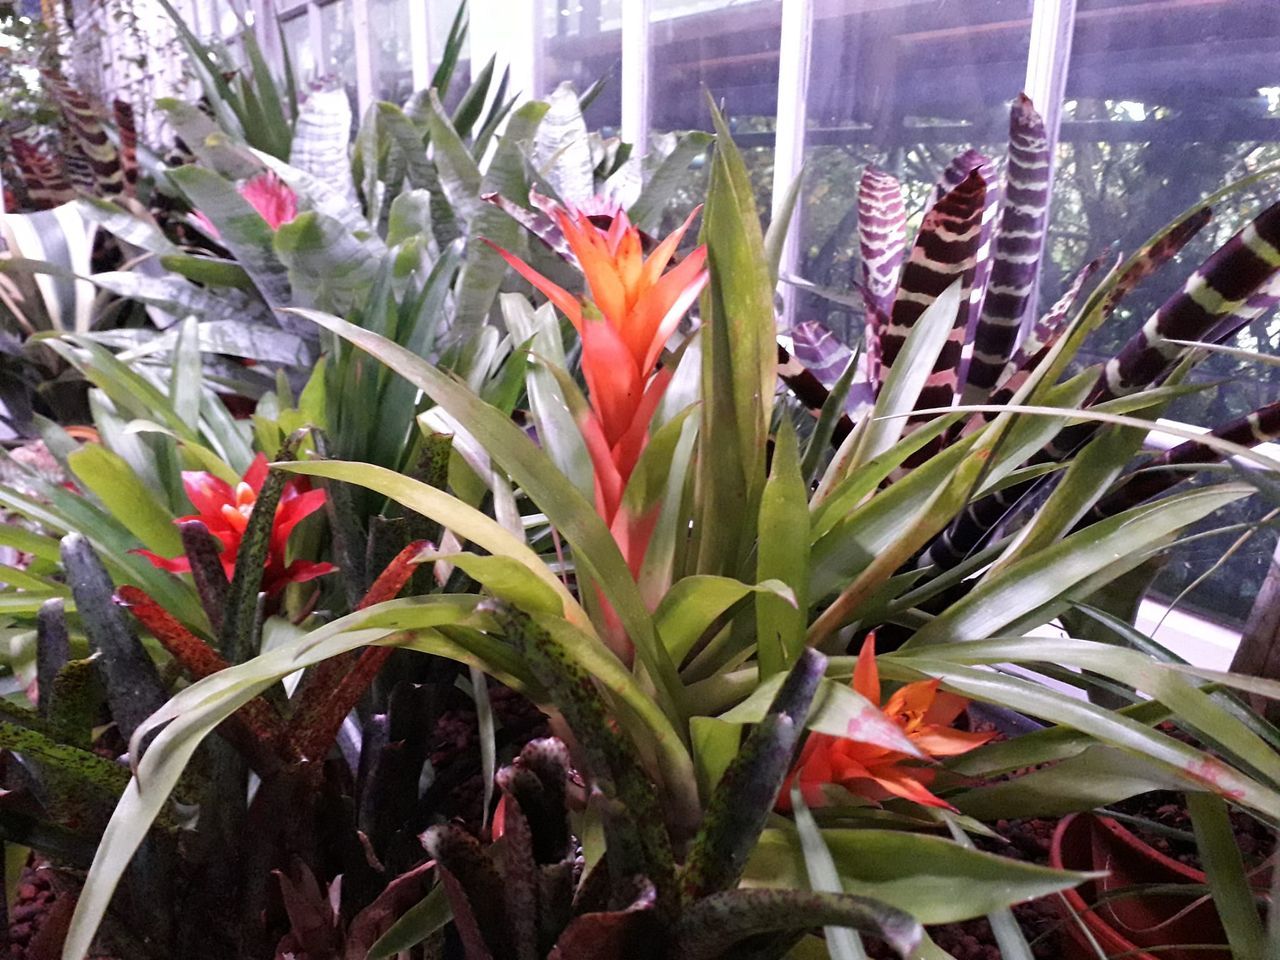 A bunch of plants with red and orange flowers